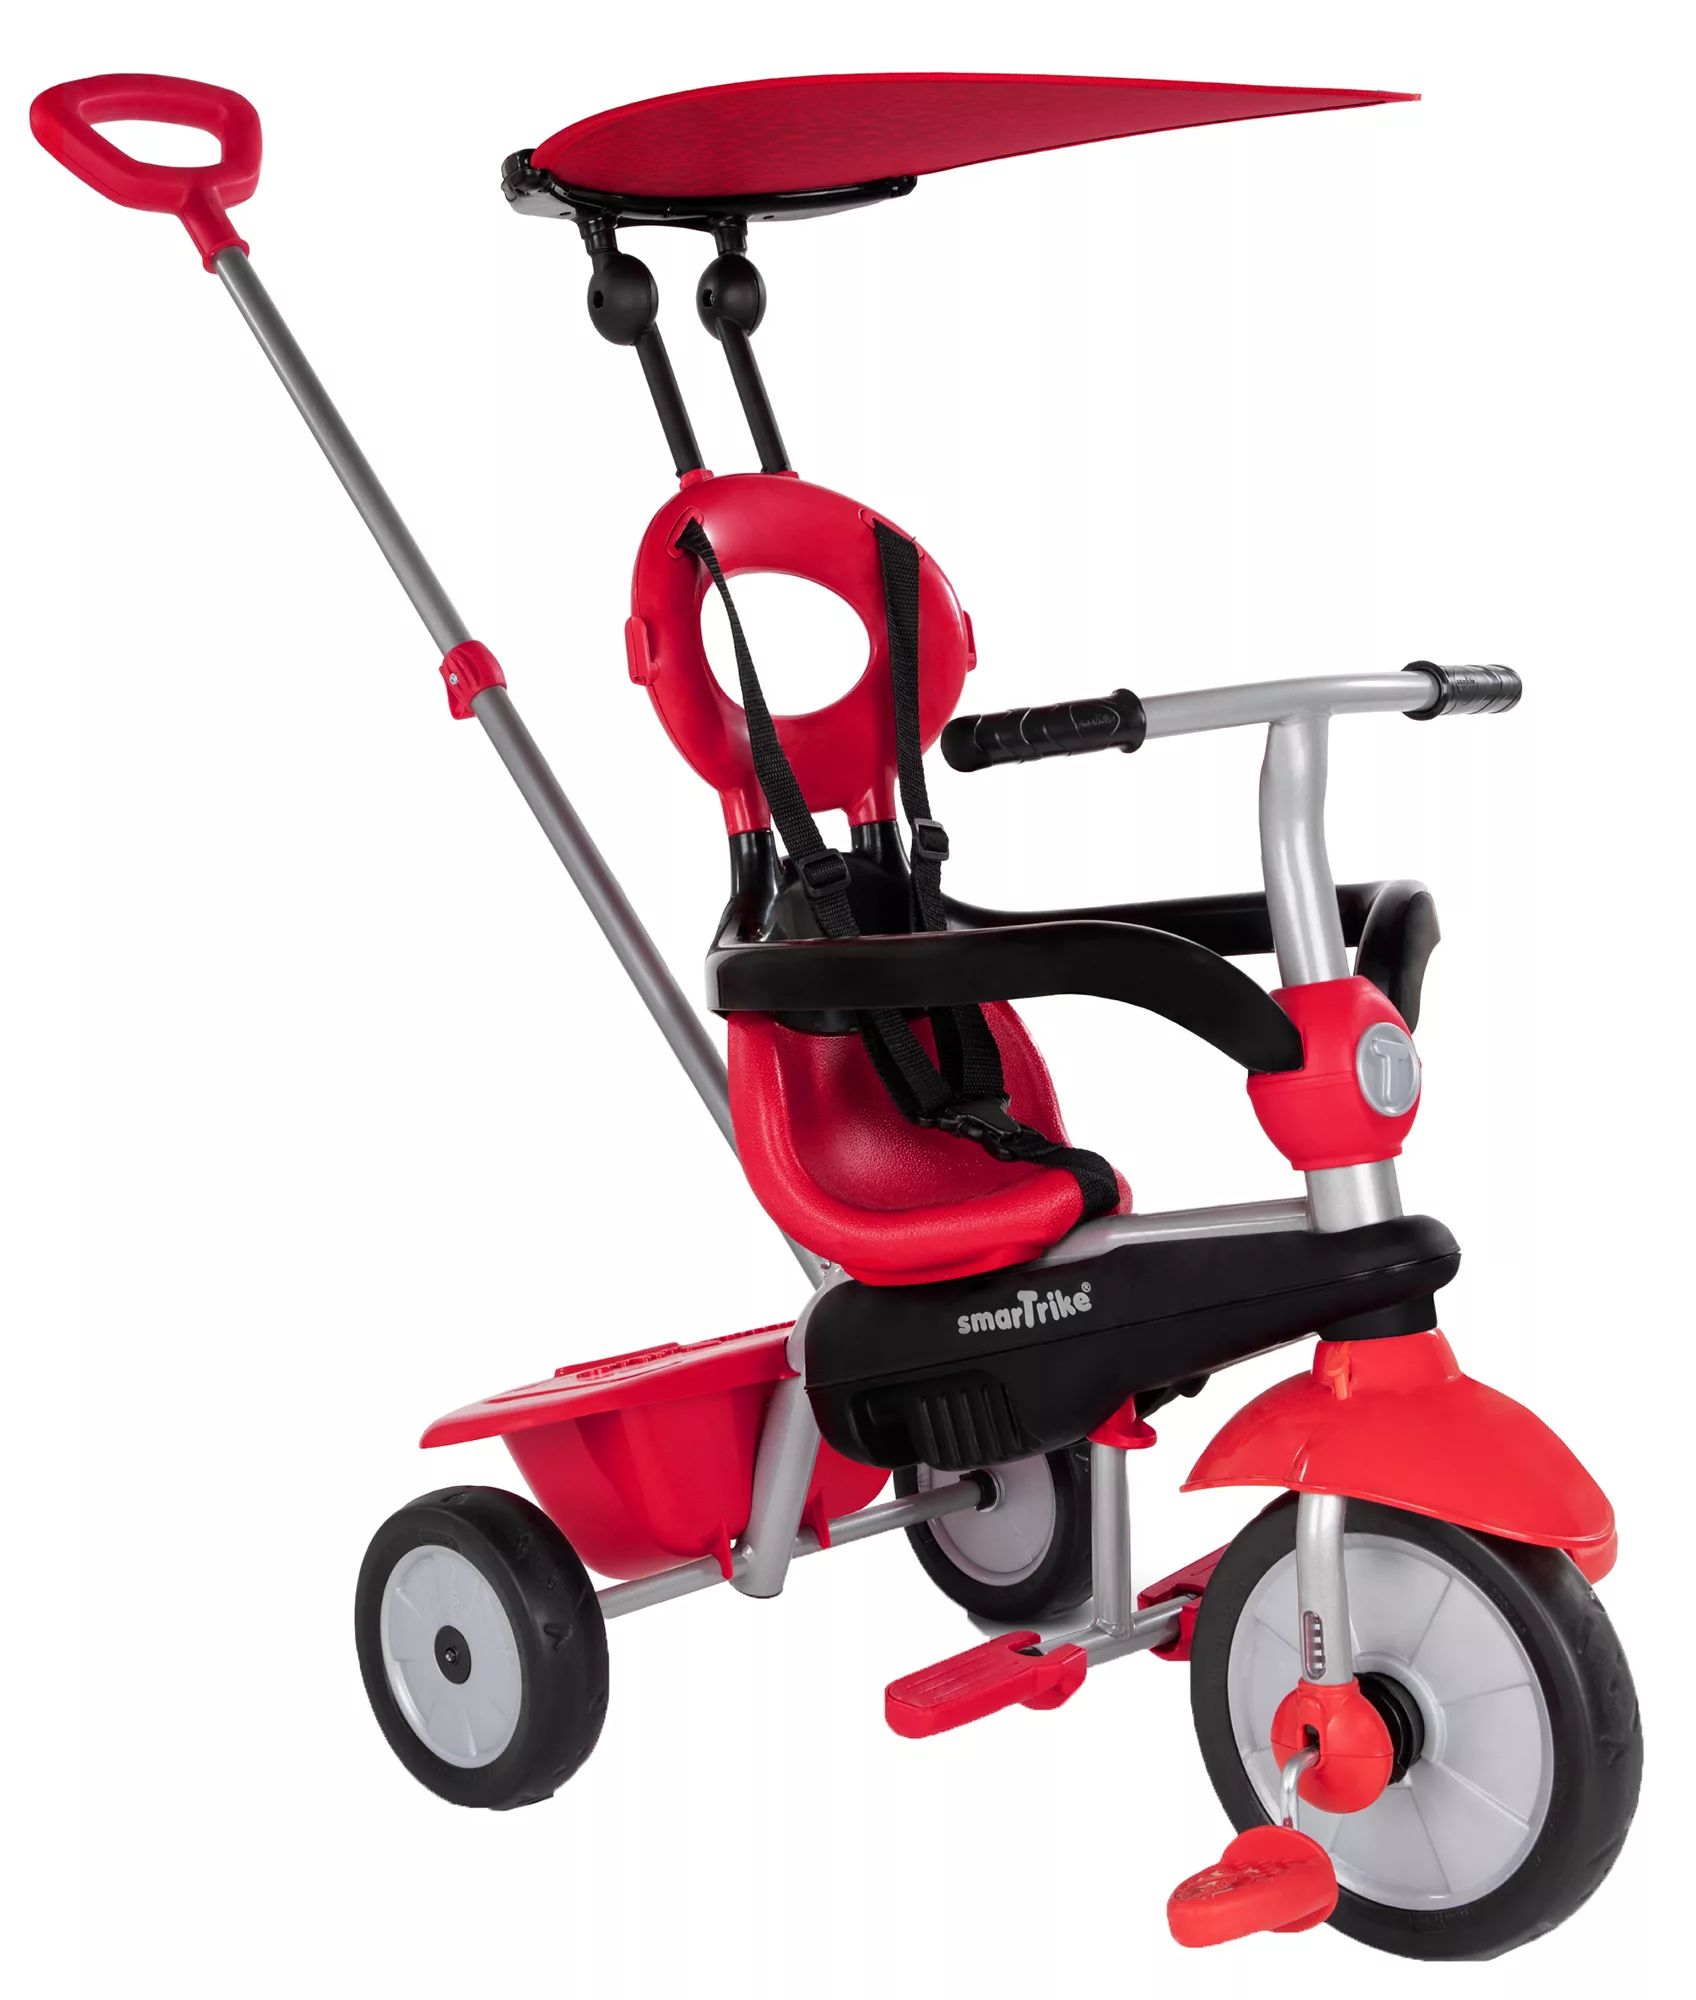 SmarTrike Toddler Toy Zoom 4-in-1 Trike, Sunshine | Dick's Sporting Goods